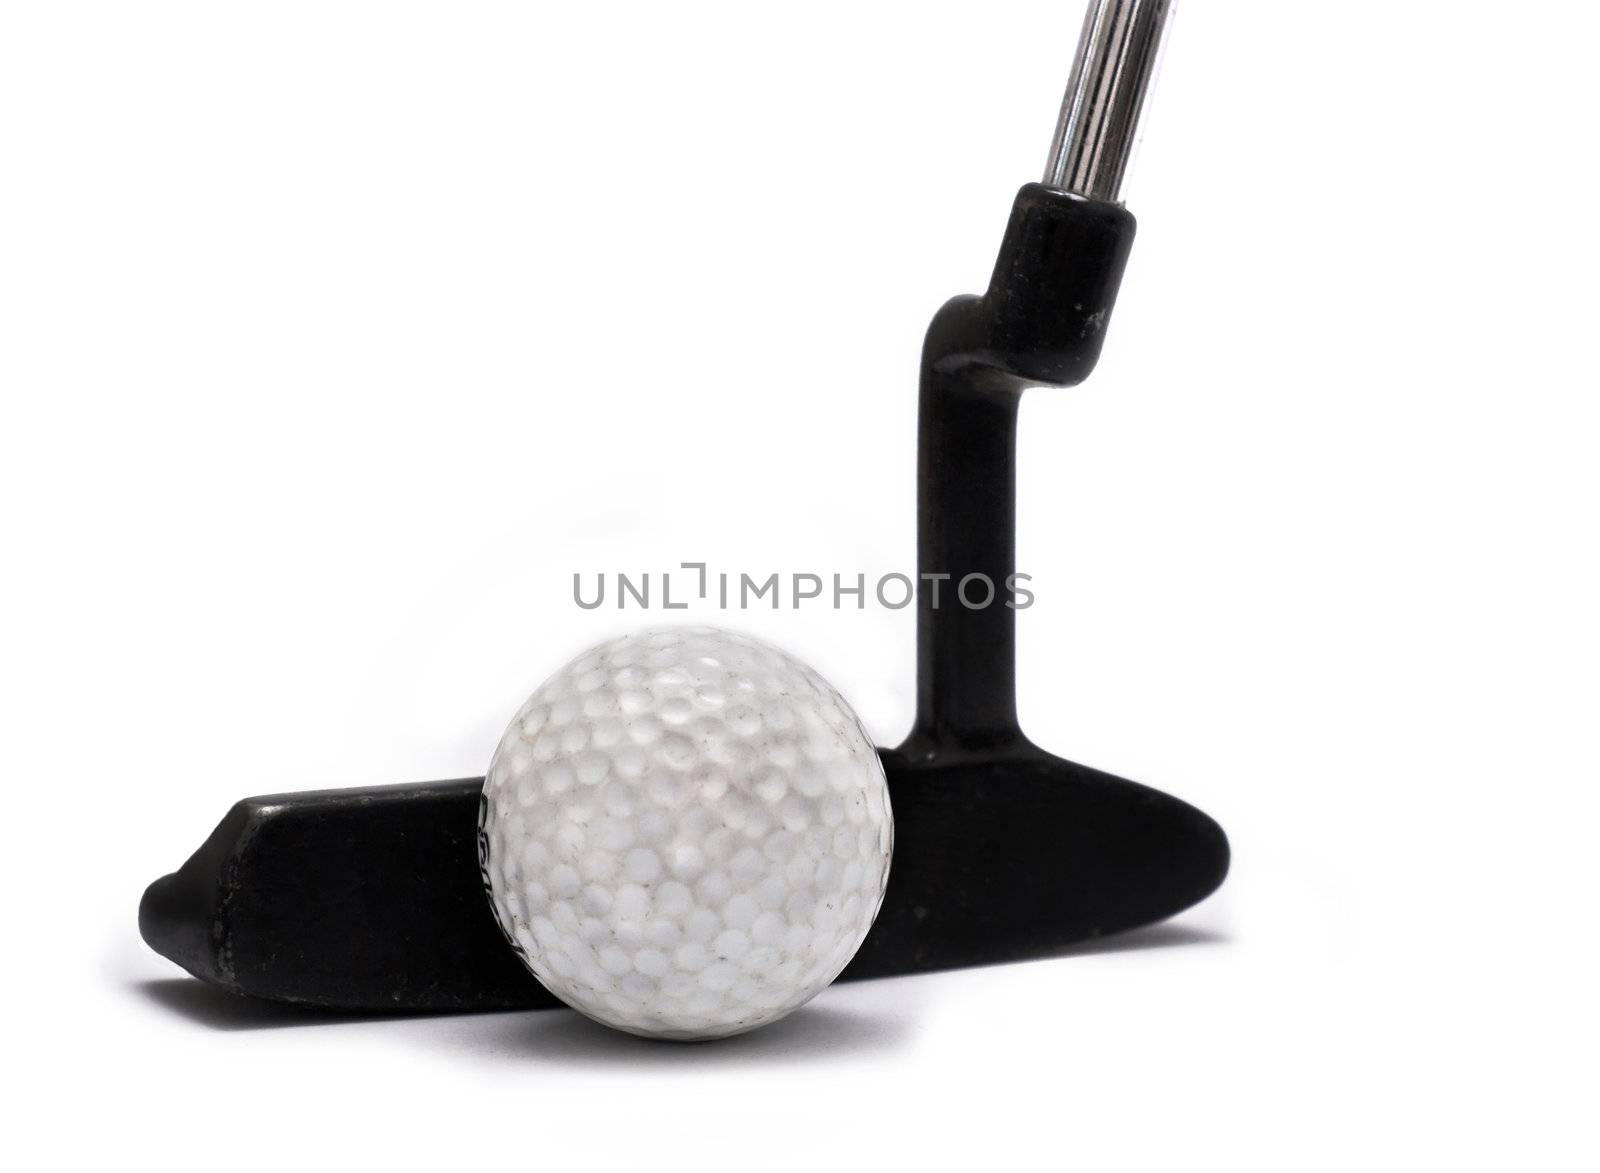 Isolated Putter and Golf Ball on White.